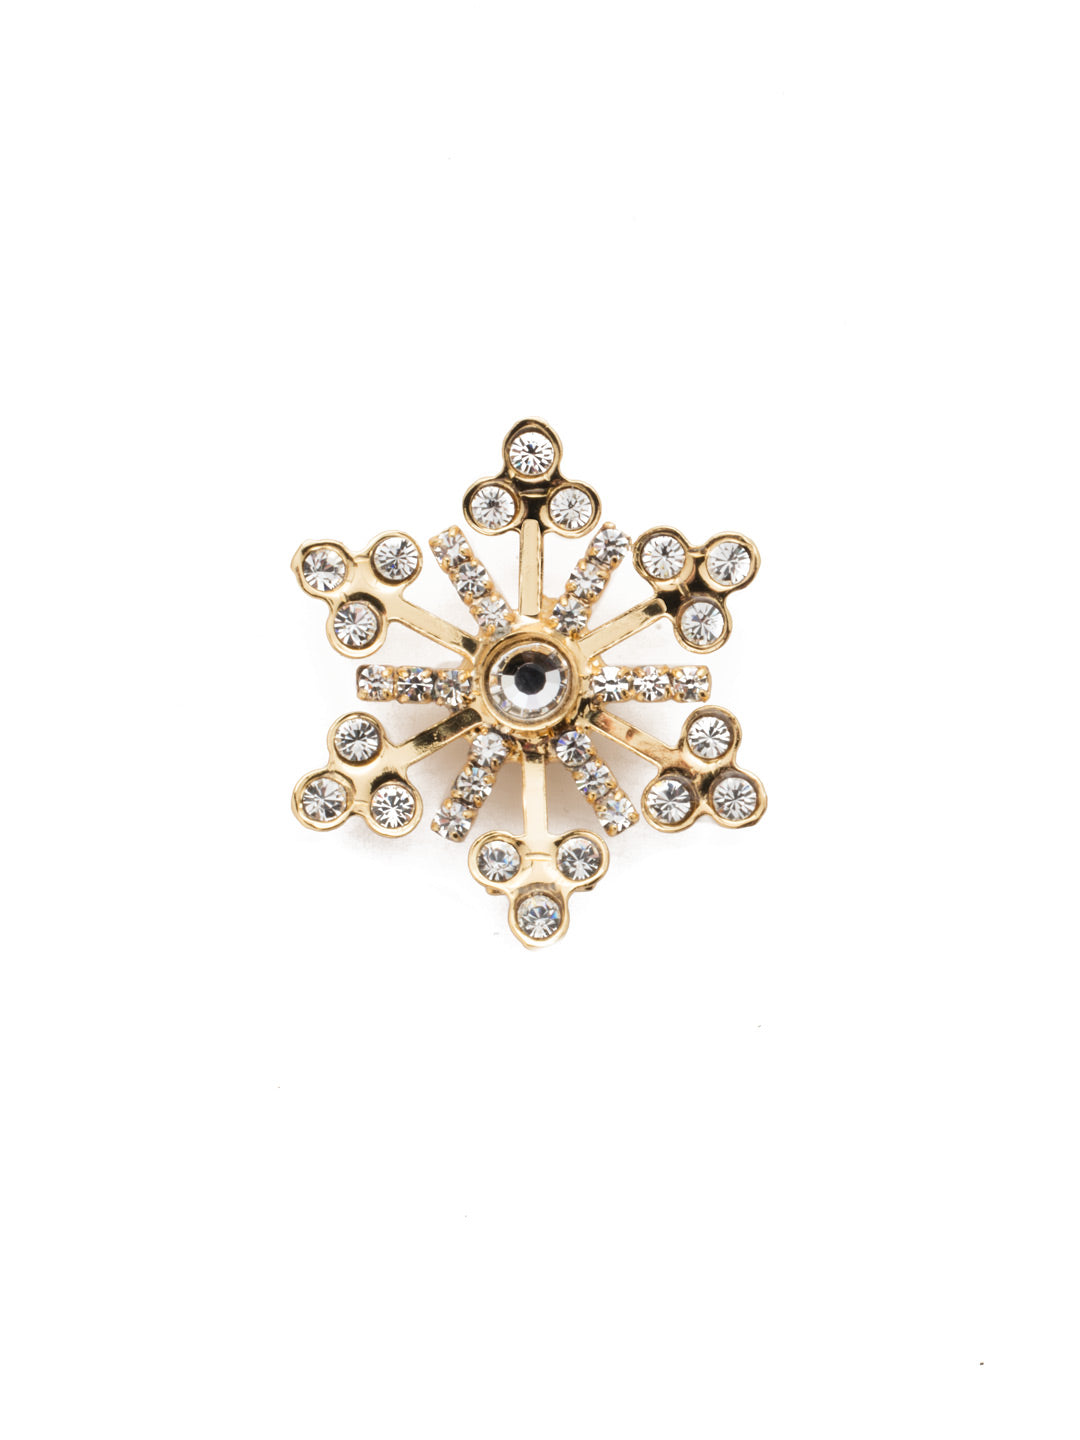 Alba Magnetic Charm - CHM8BGCRY - <p>A snowflake Magnetic charm is just what you need this holiday seaso and is engulfed in beautiful petite cyrstals. Your bag, blazer, dress or refrigerator will now have the perfect shine. From Sorrelli's Crystal collection in our Bright Gold-tone finish.</p>